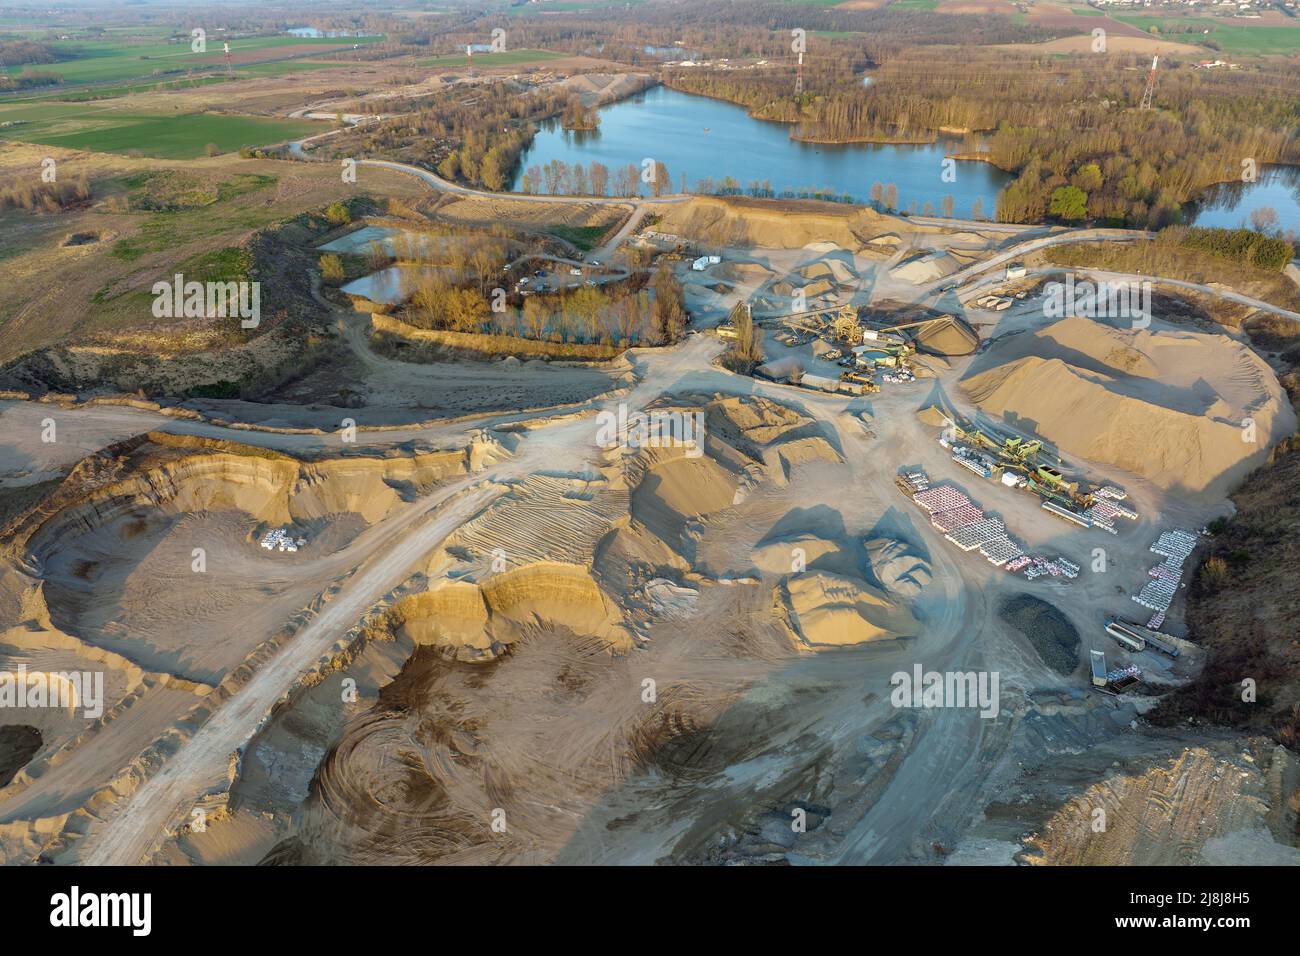 Aerial view of open pit mining of limestone materials for construction industry with excavators and dump trucks Stock Photo